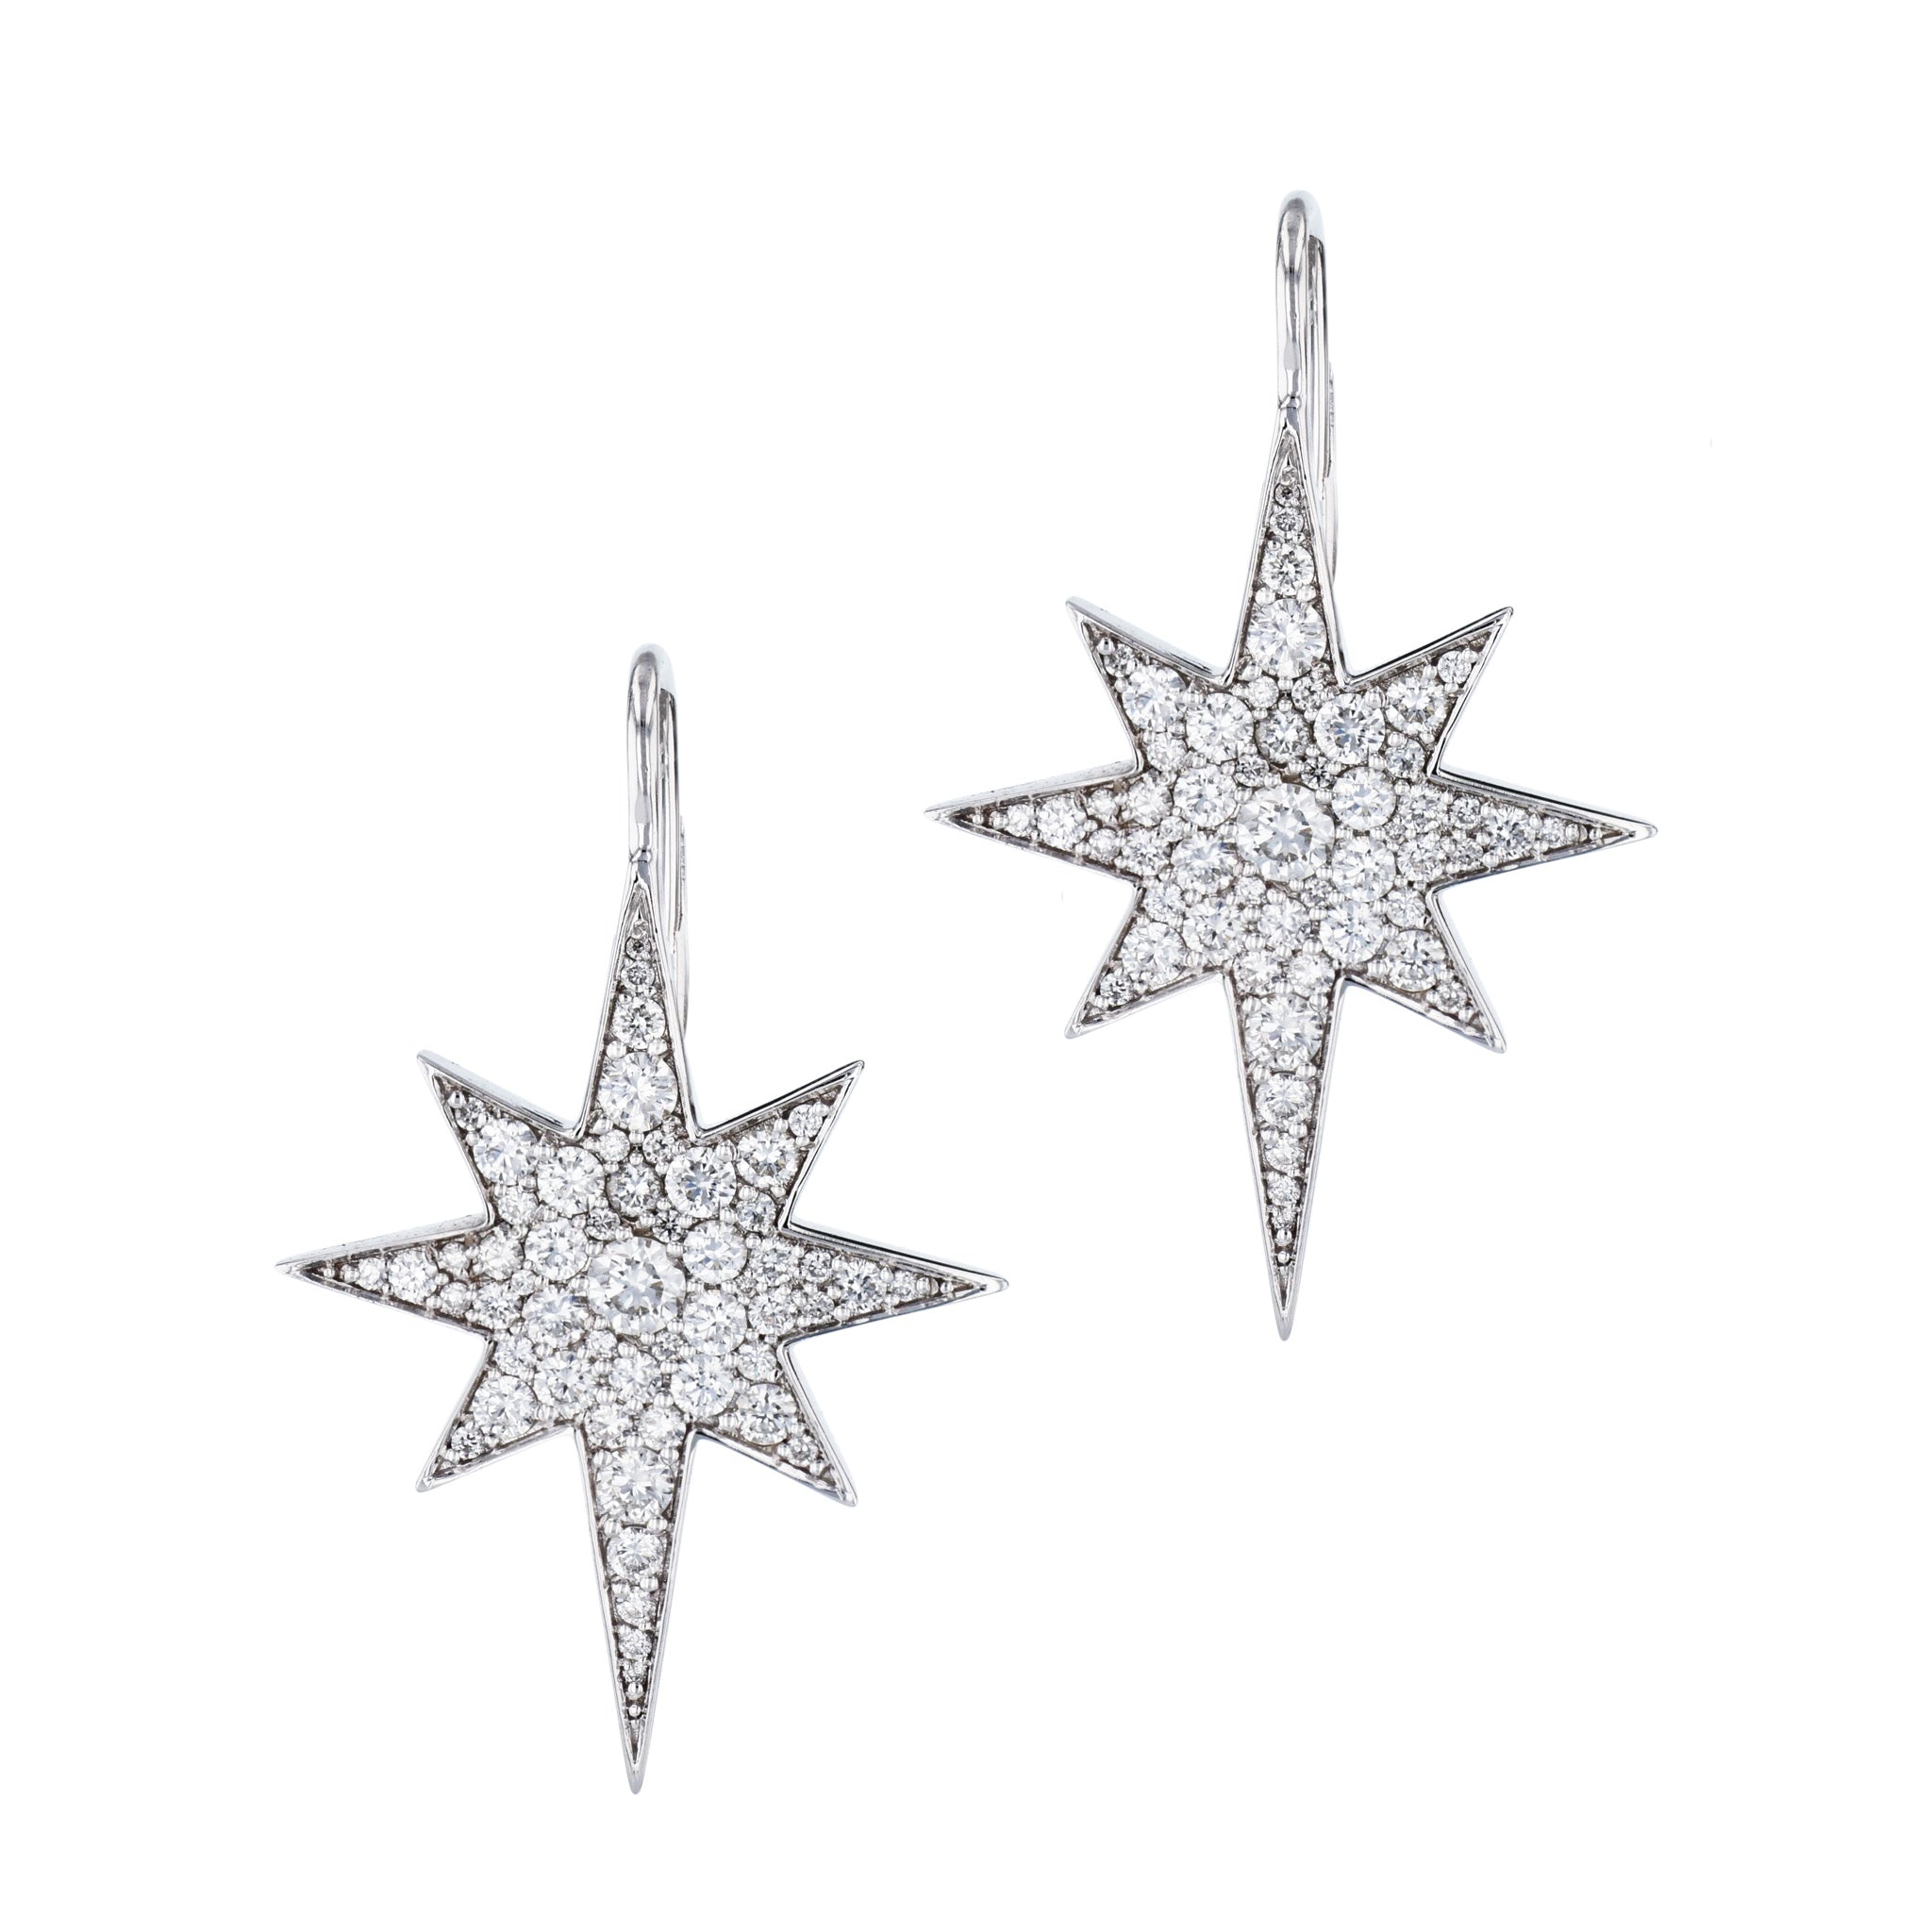 North Star Diamond Pave White Gold Drop Earrings Earrings Curated by H